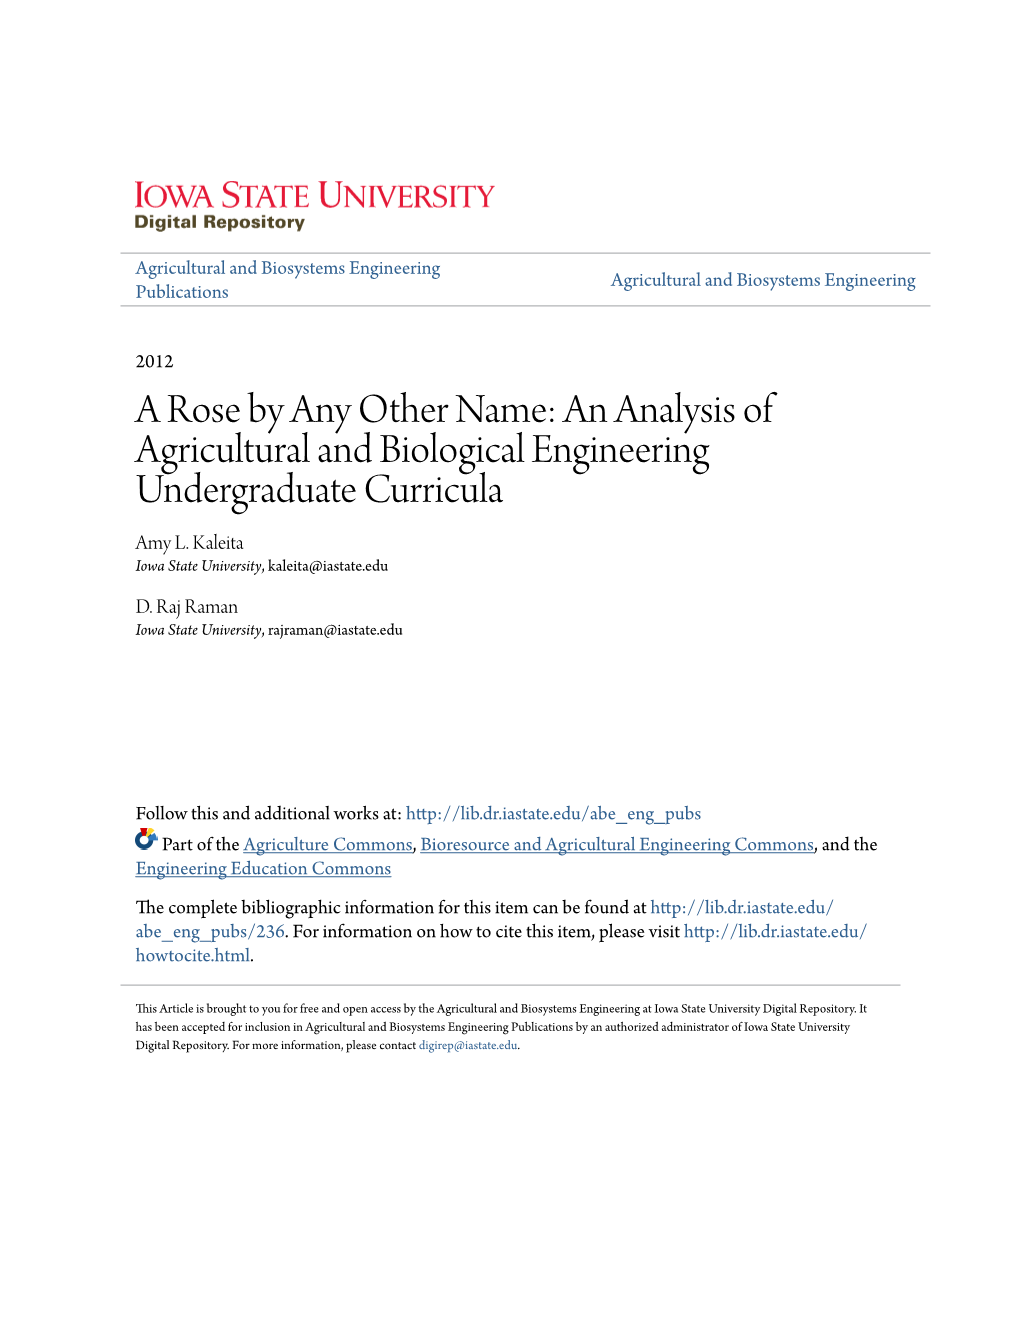 An Analysis of Agricultural and Biological Engineering Undergraduate Curricula Amy L